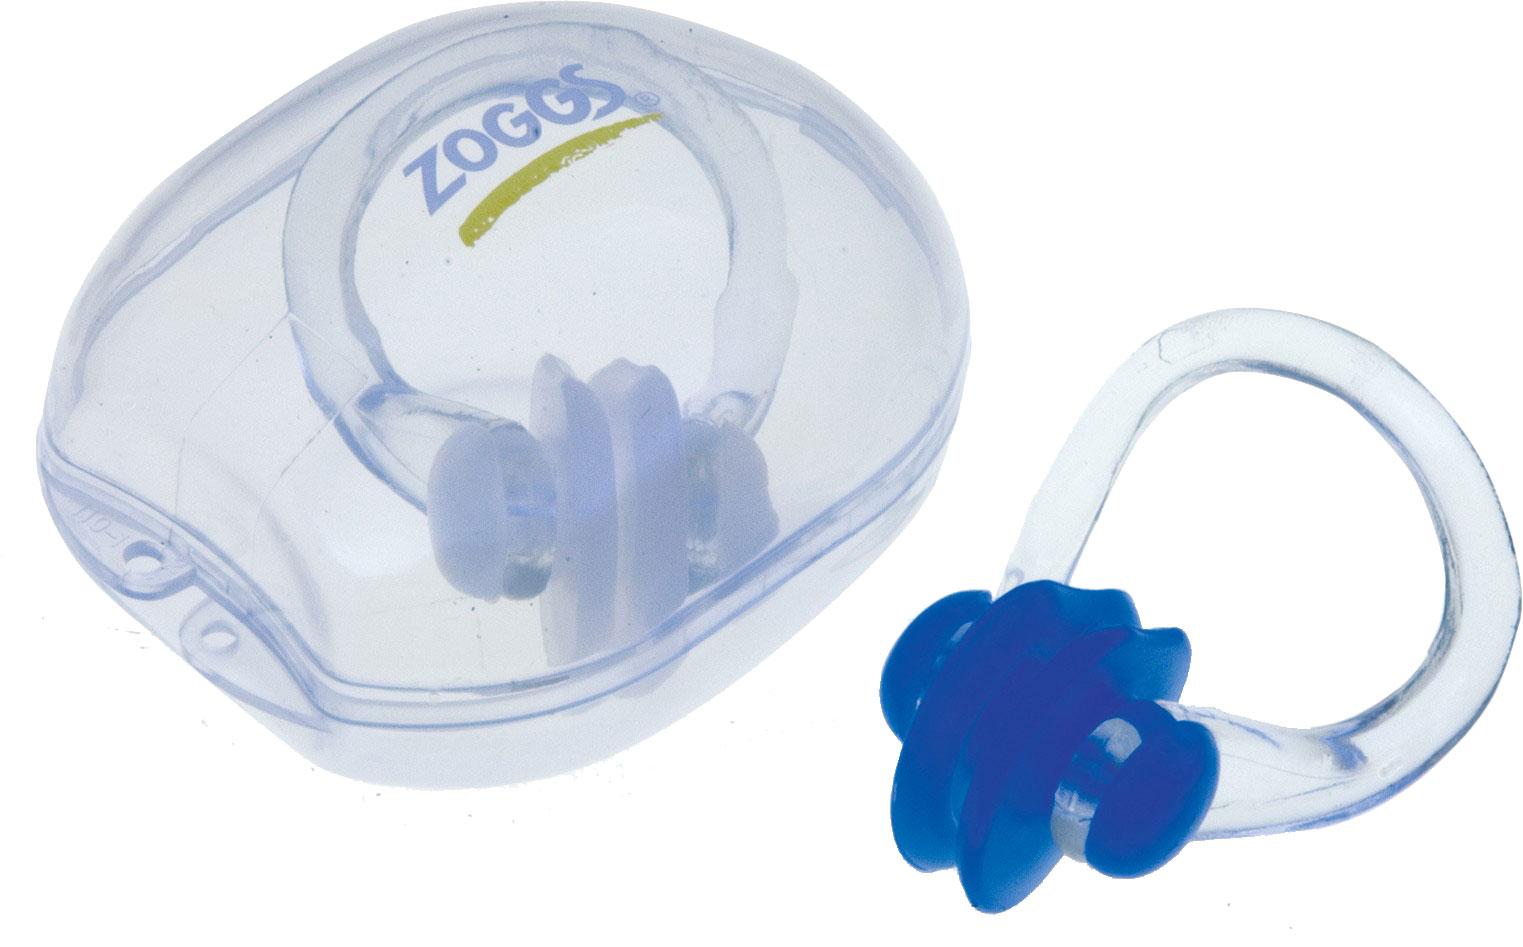 Zoggs Nose Clip - One Size